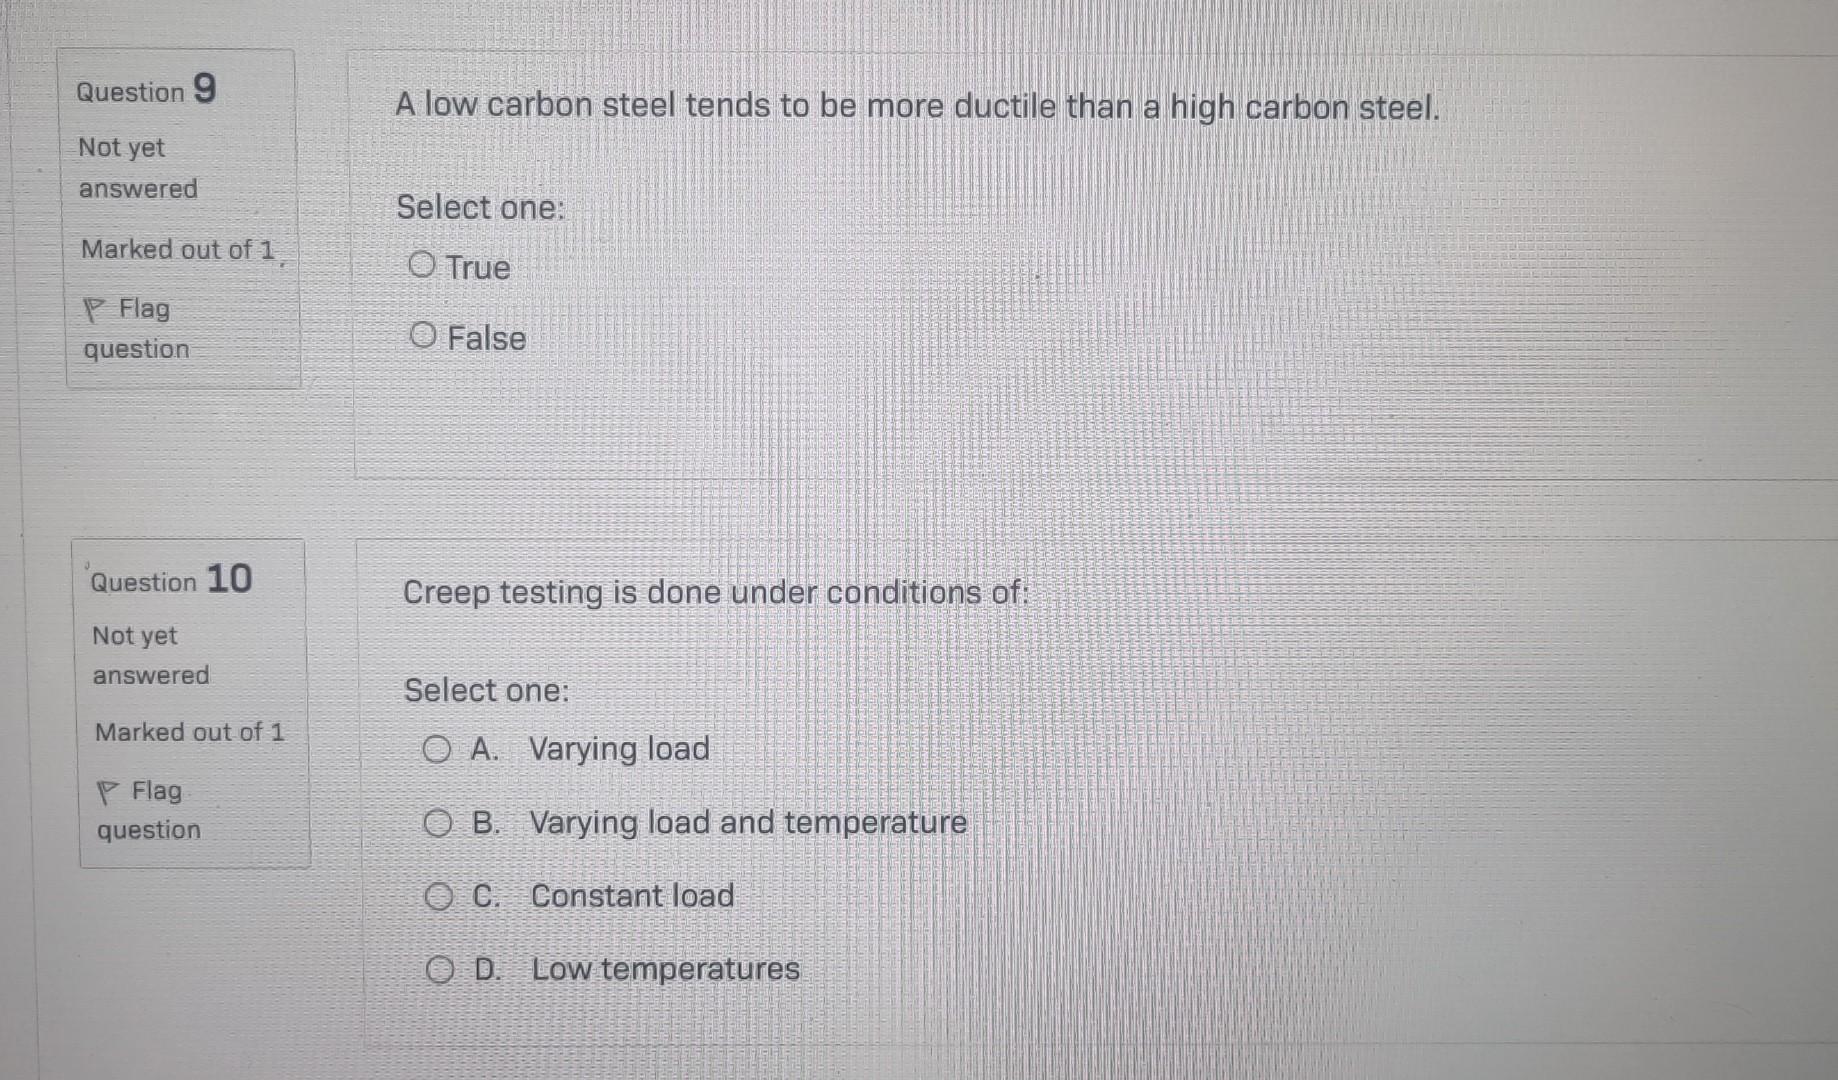 Creep testing is done under conditions of:
Select one:
A. Varying load
B. Varying load and temperature
C. Constant load
D. Lo